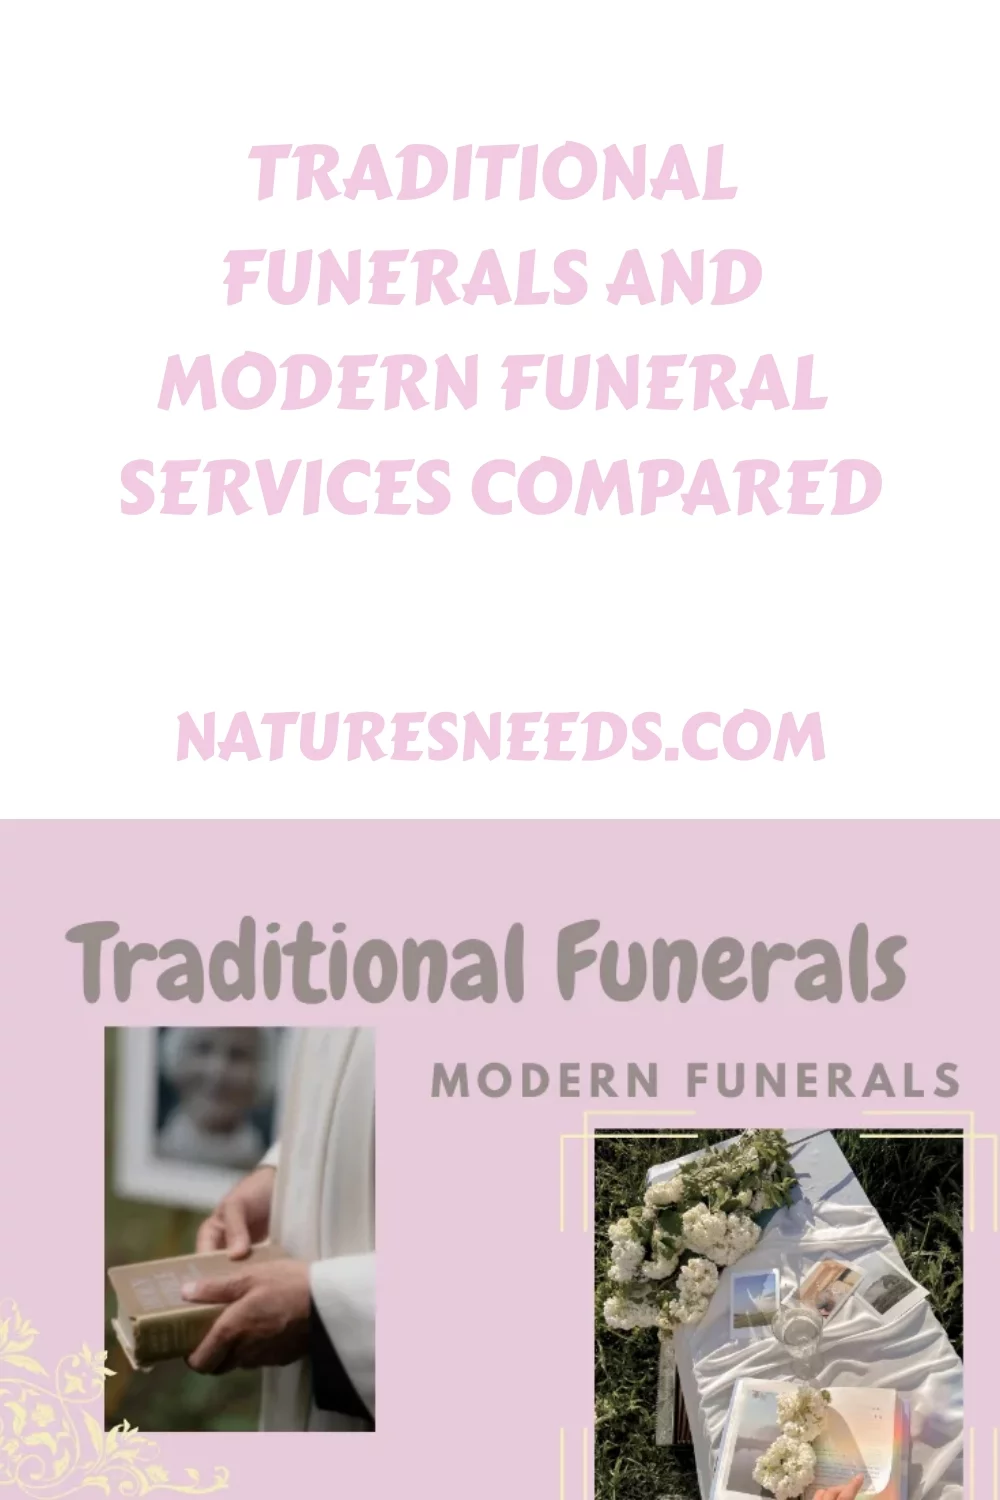 Traditional Funerals and Modern Funeral Services Compared